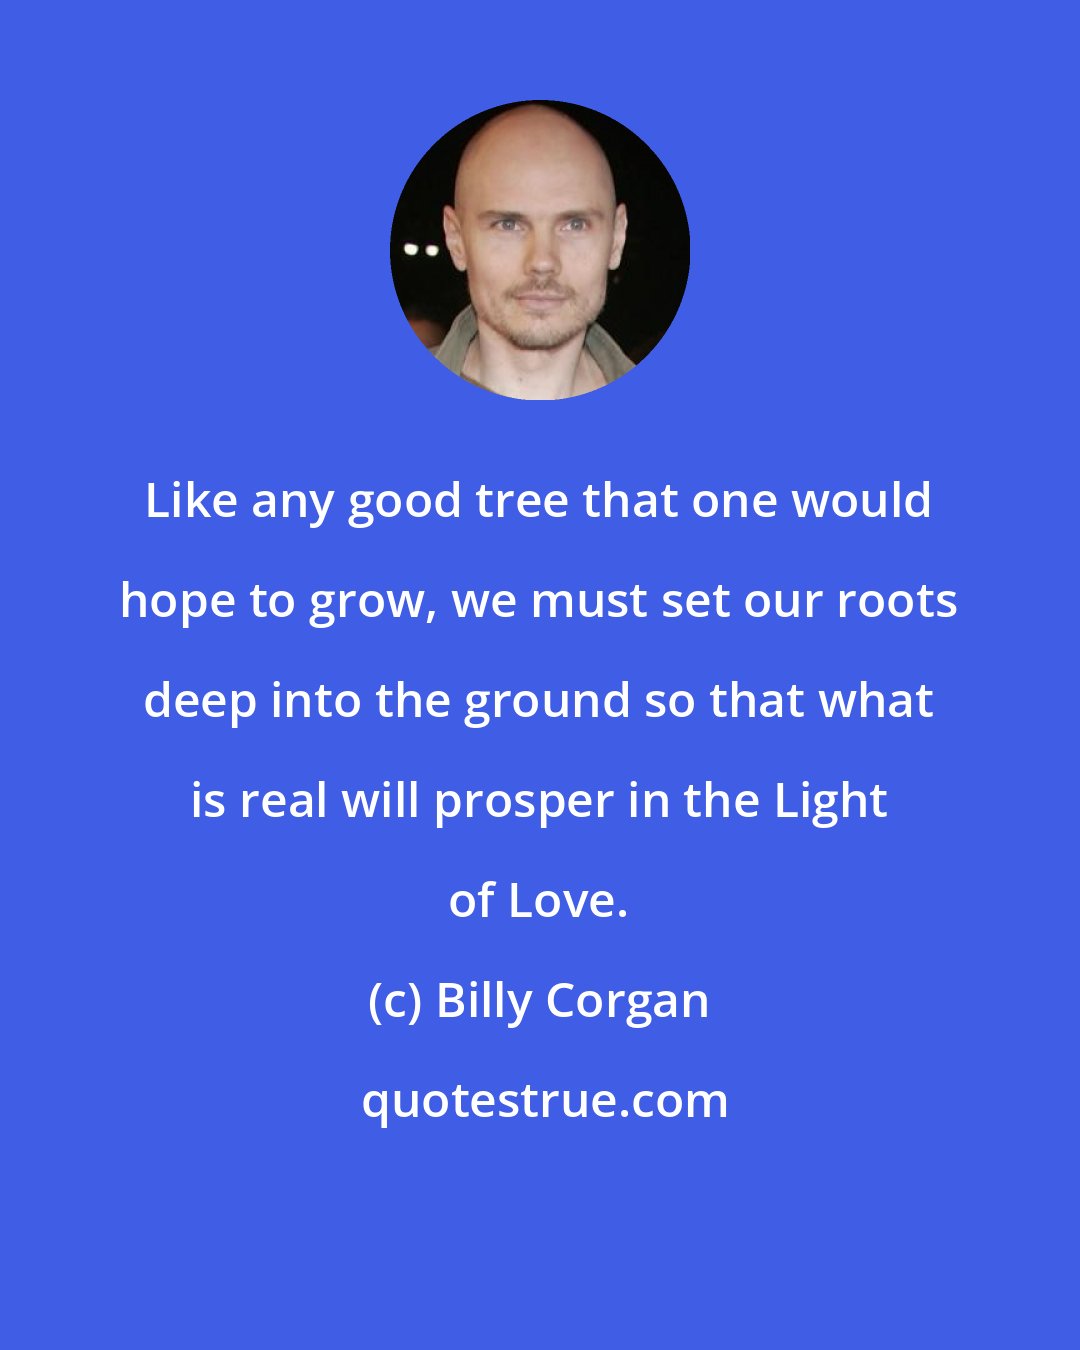 Billy Corgan: Like any good tree that one would hope to grow, we must set our roots deep into the ground so that what is real will prosper in the Light of Love.